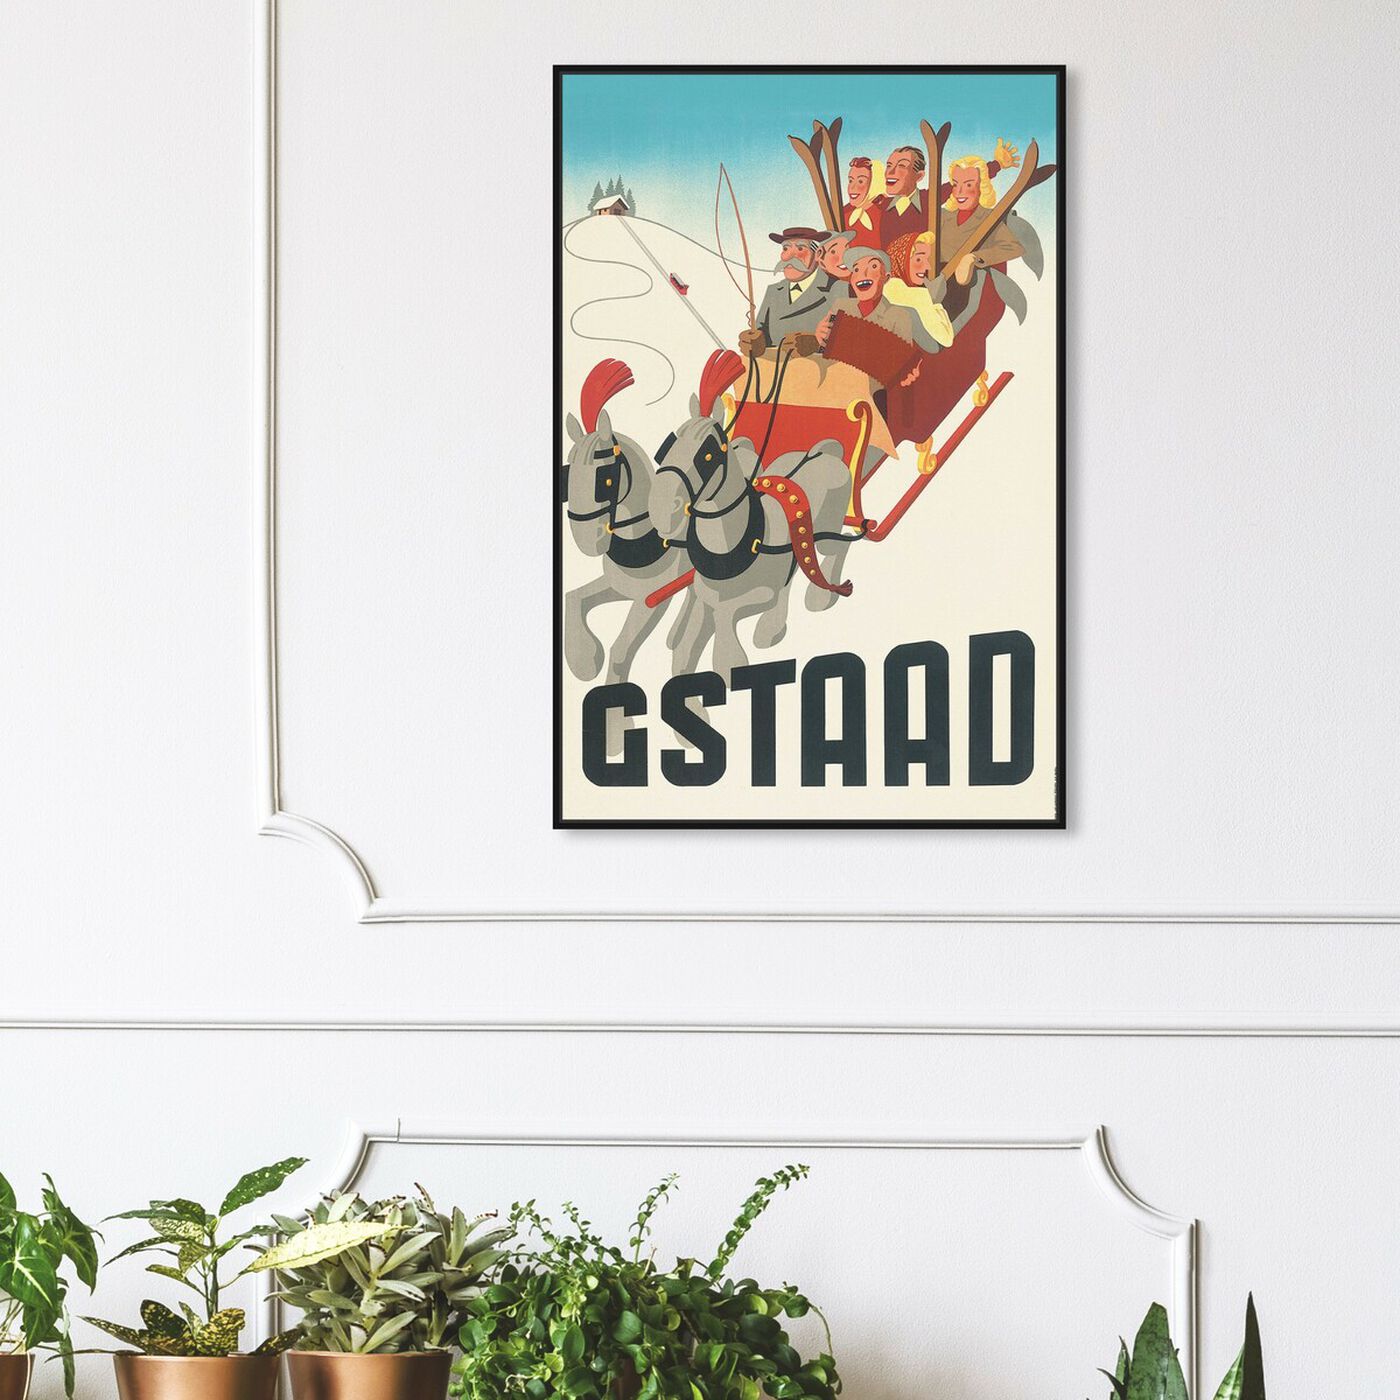 Hanging view of Gstaad featuring advertising and posters art.